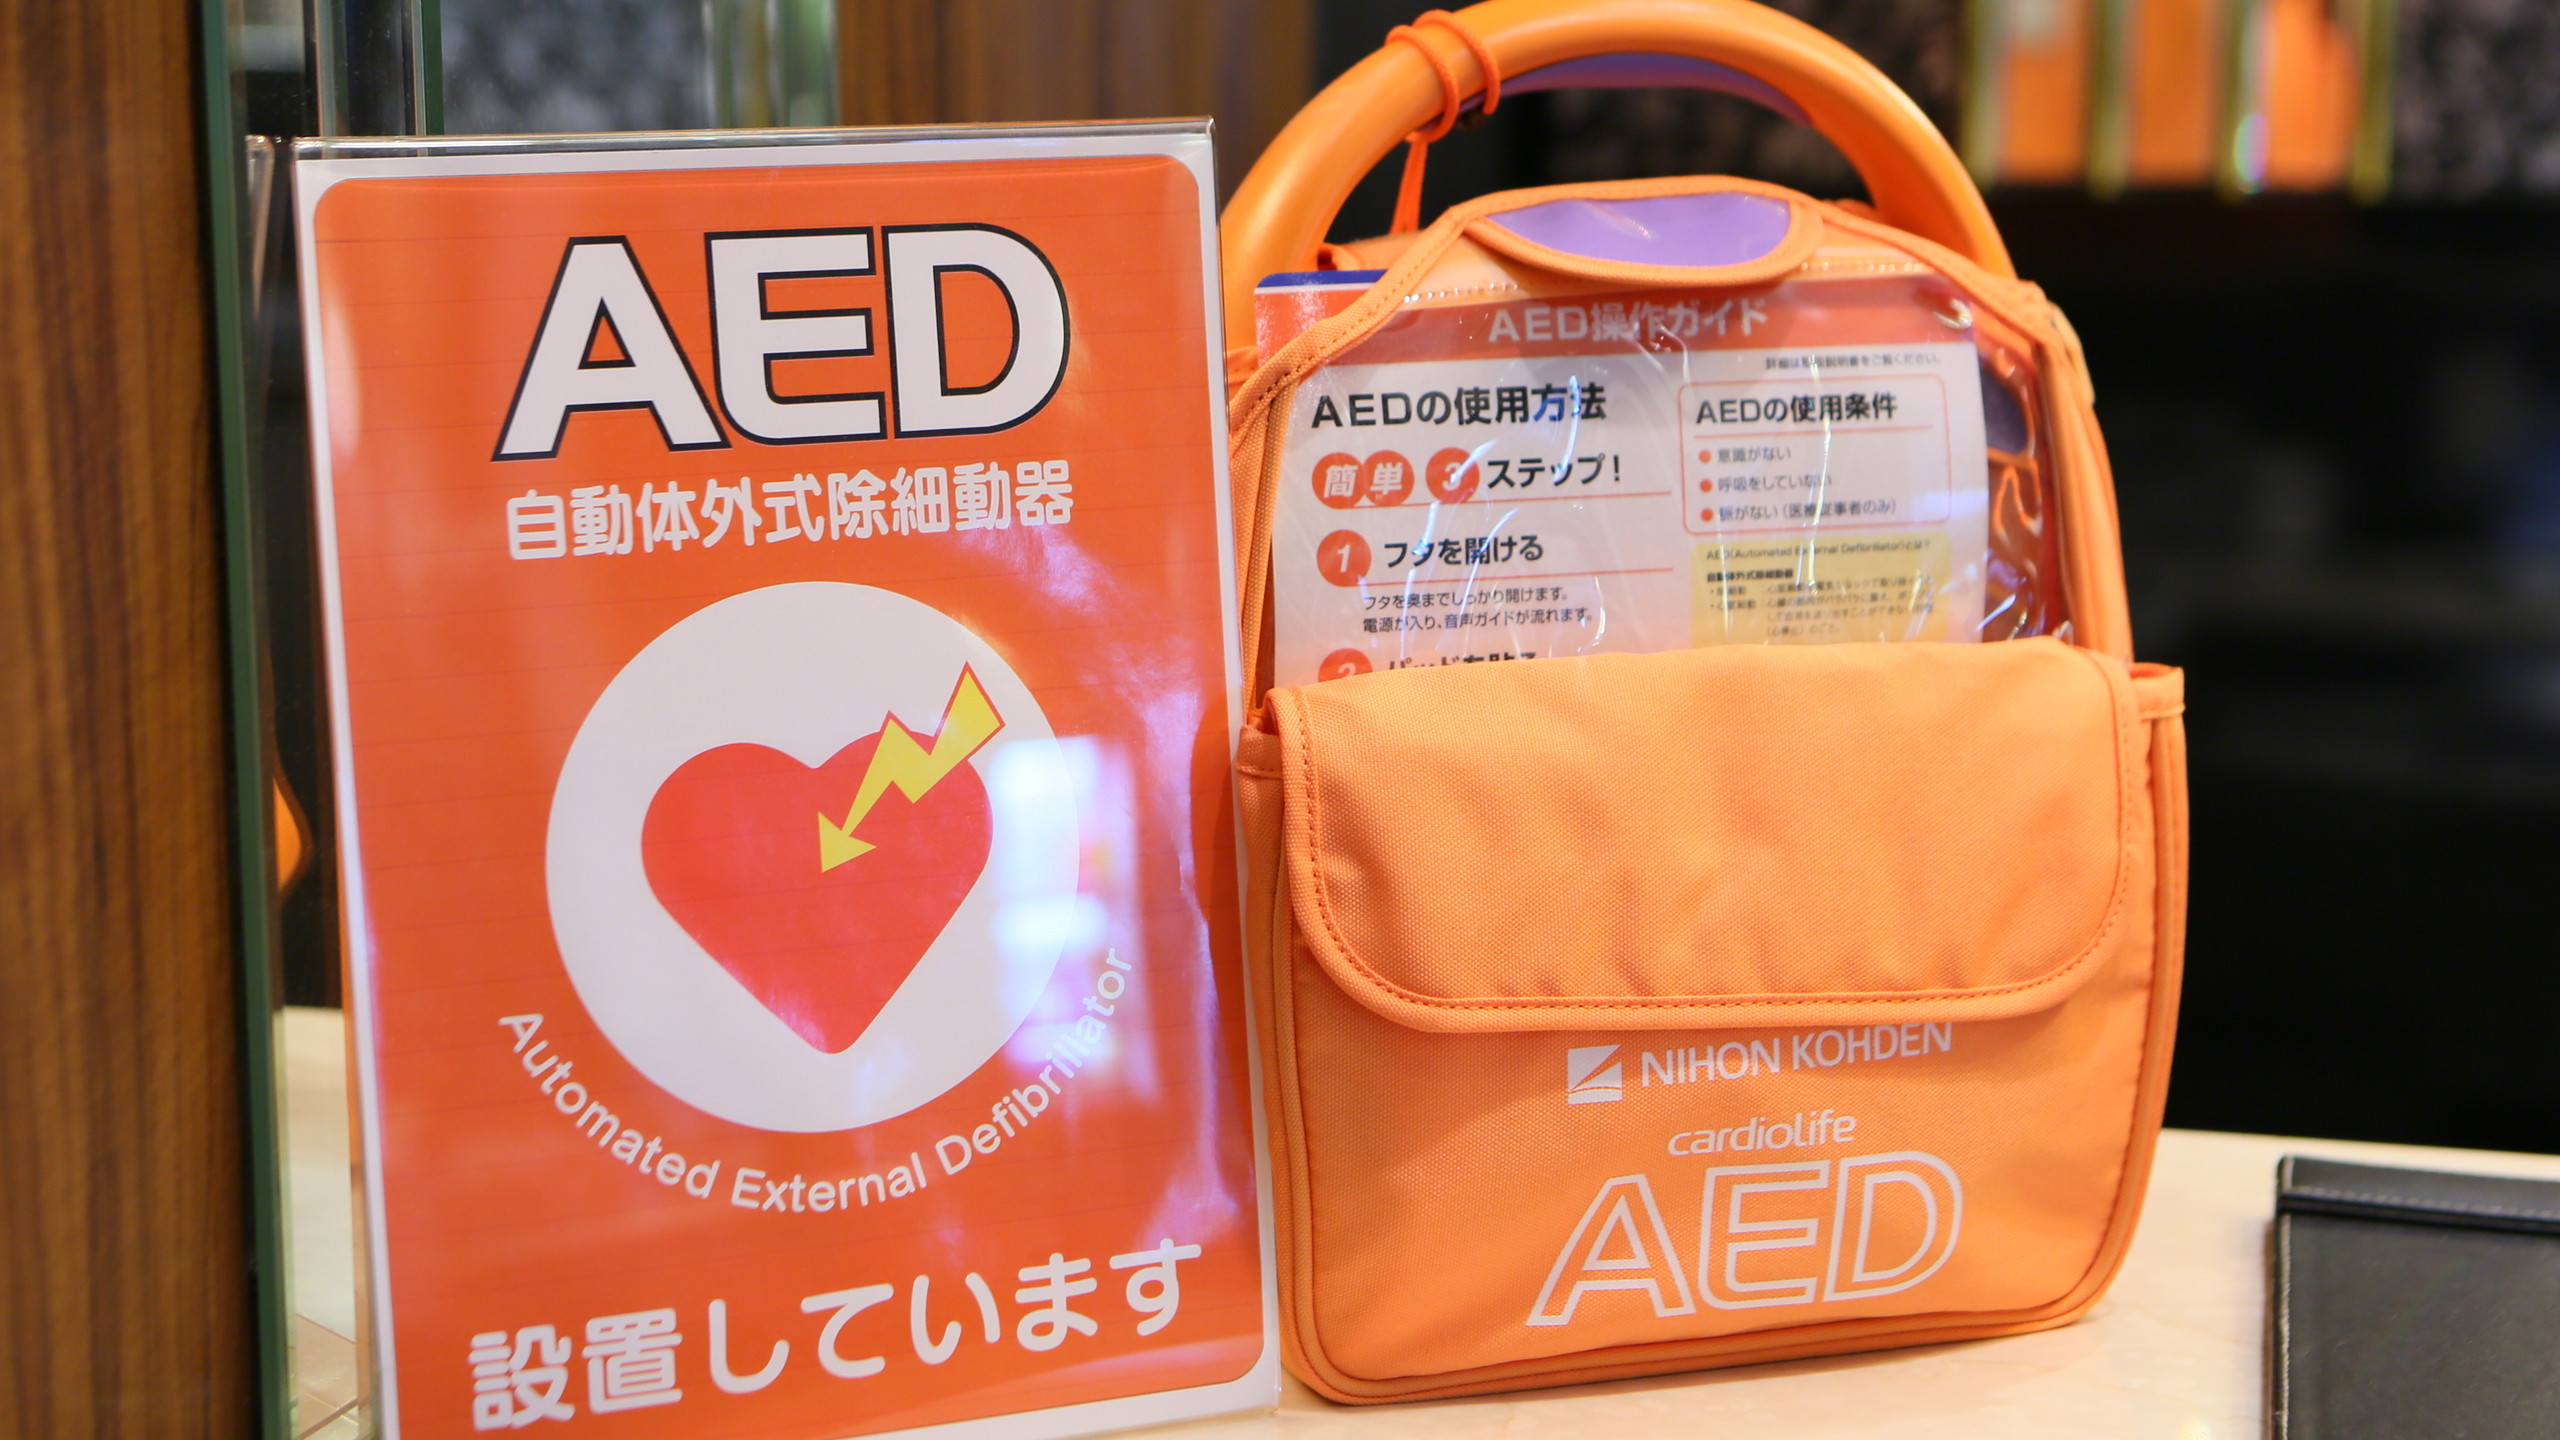 ■AED